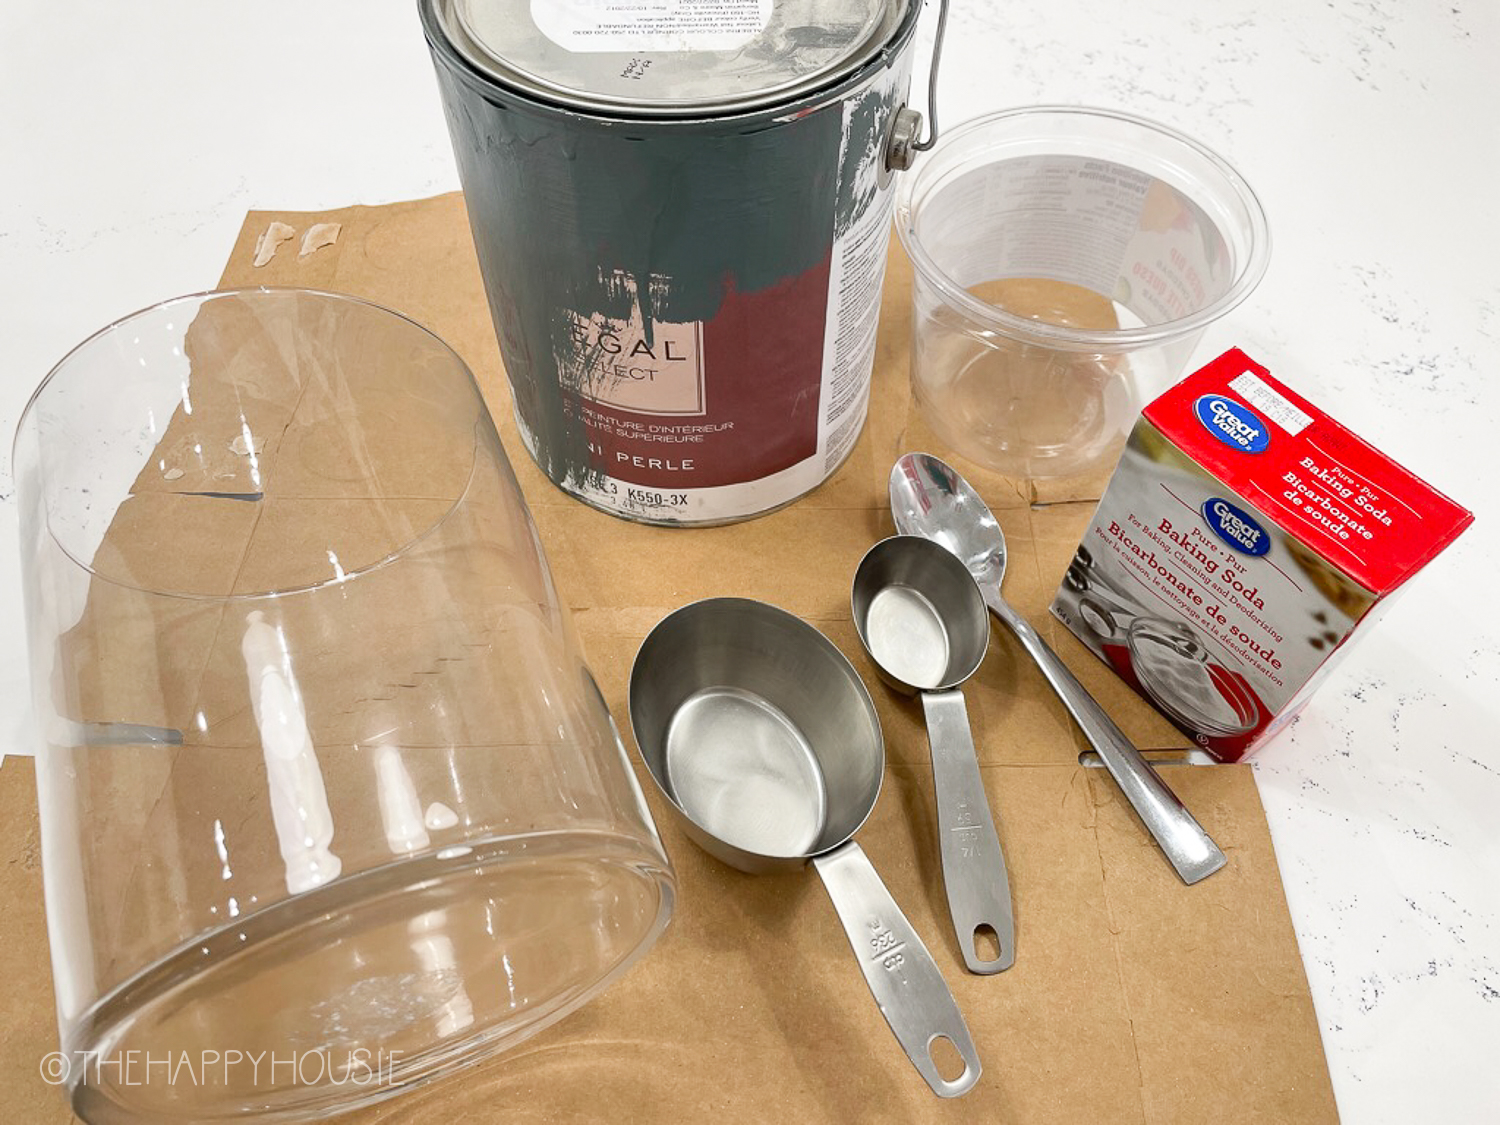 Baking soda is beside a can of paint.